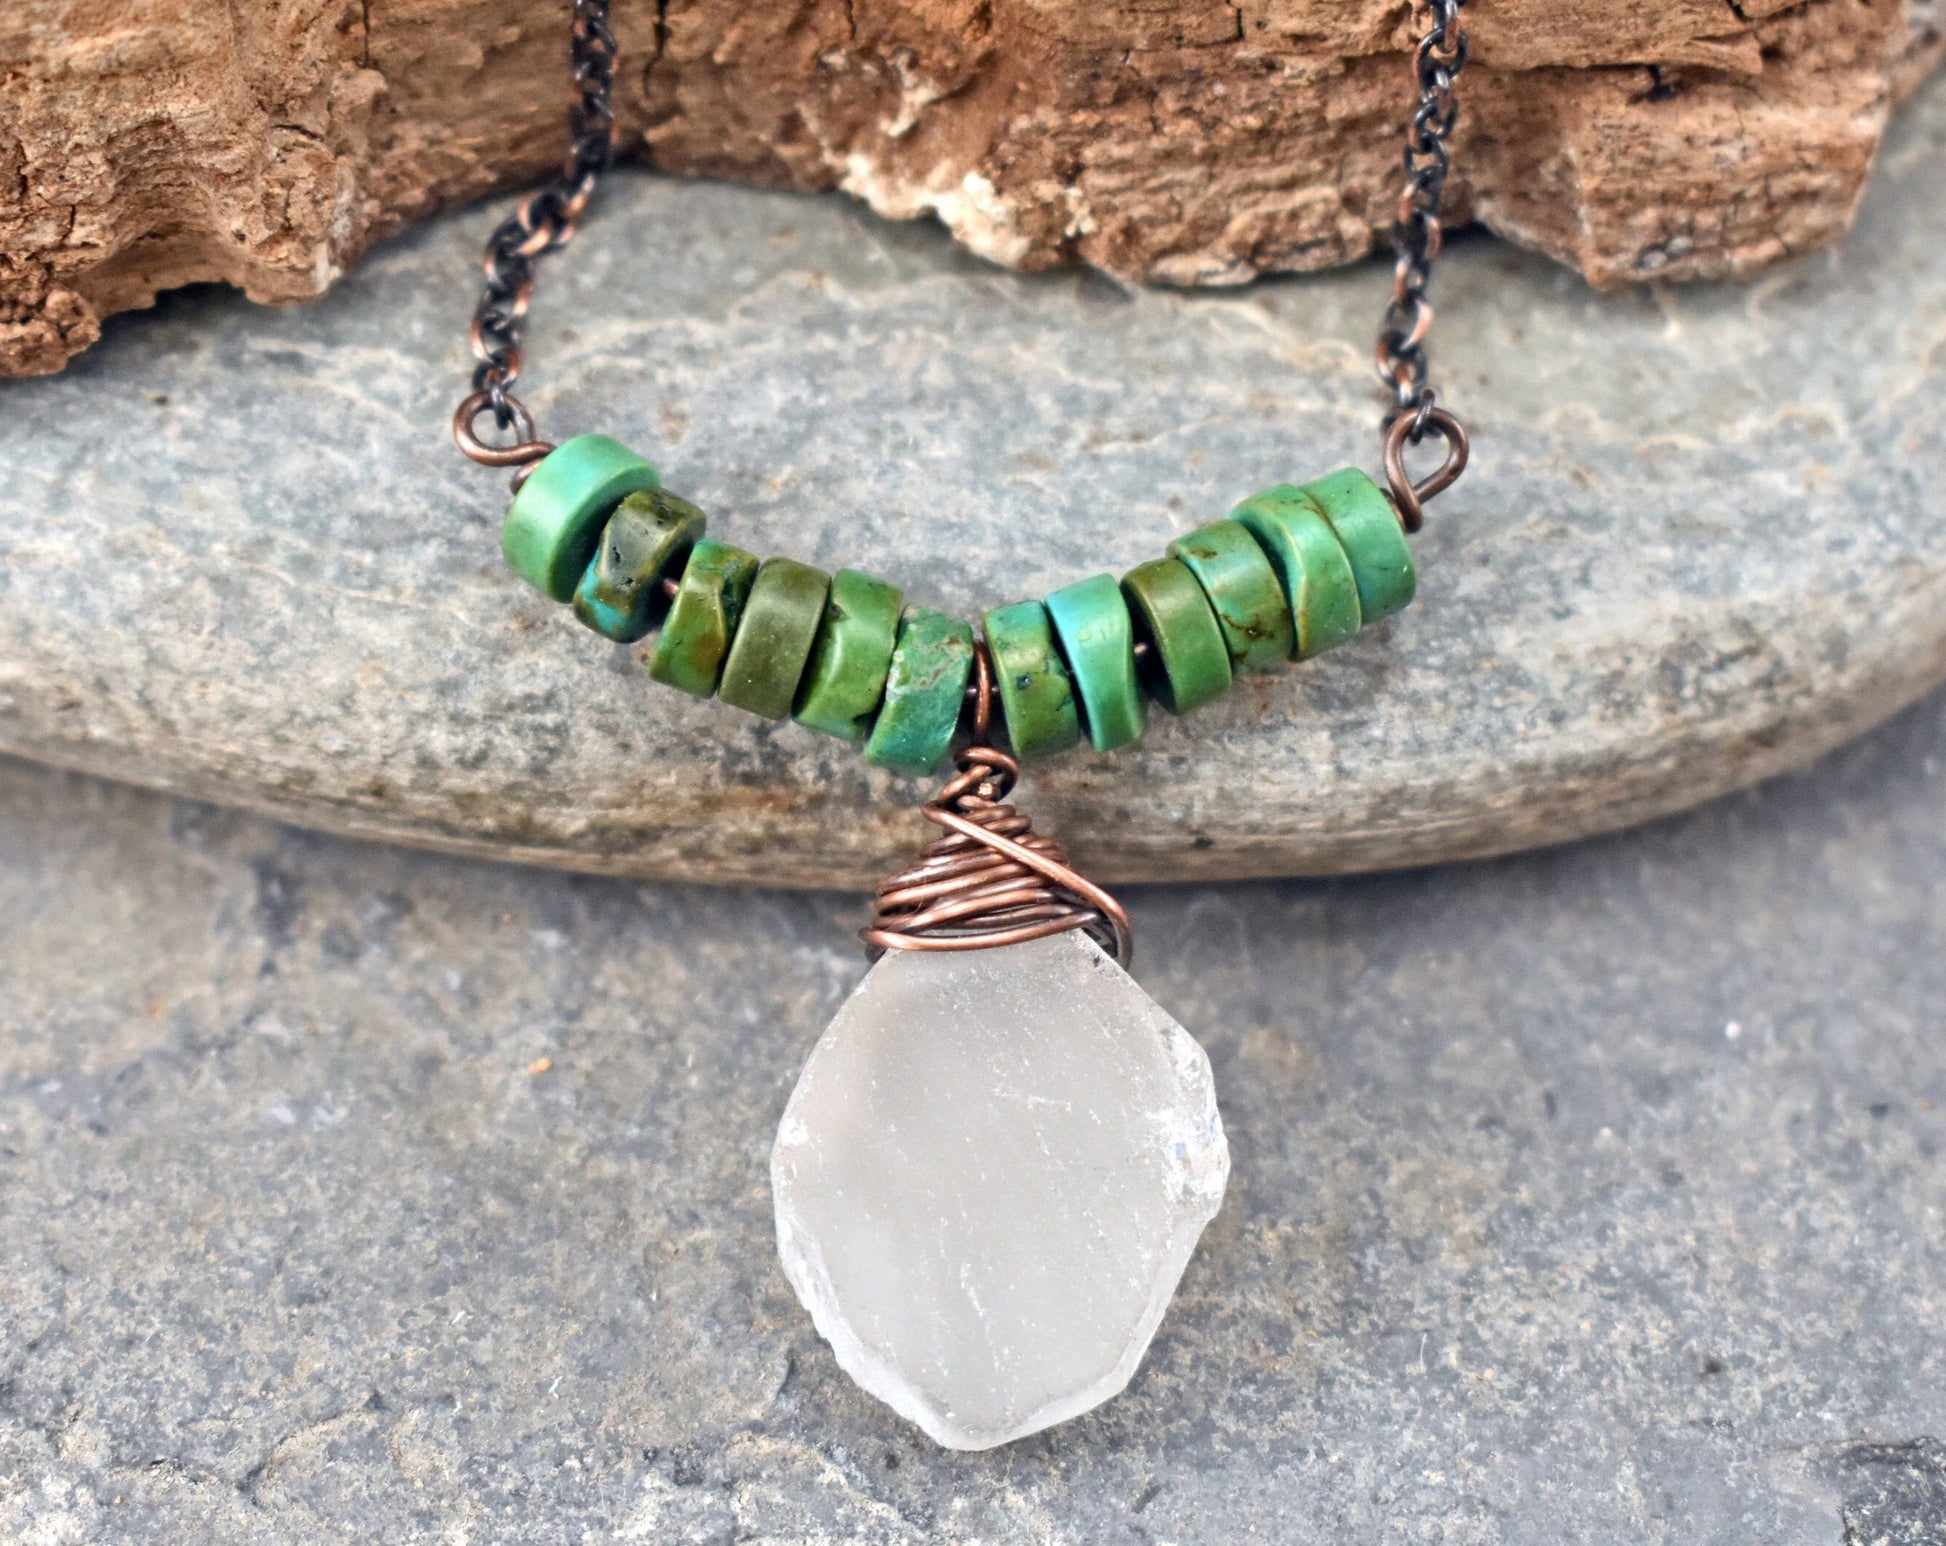 Raw Quartz Teardrop Necklace, Rustic Copper Green Turquoise Pendant, Natural Rough Stone Jewelry Handmade